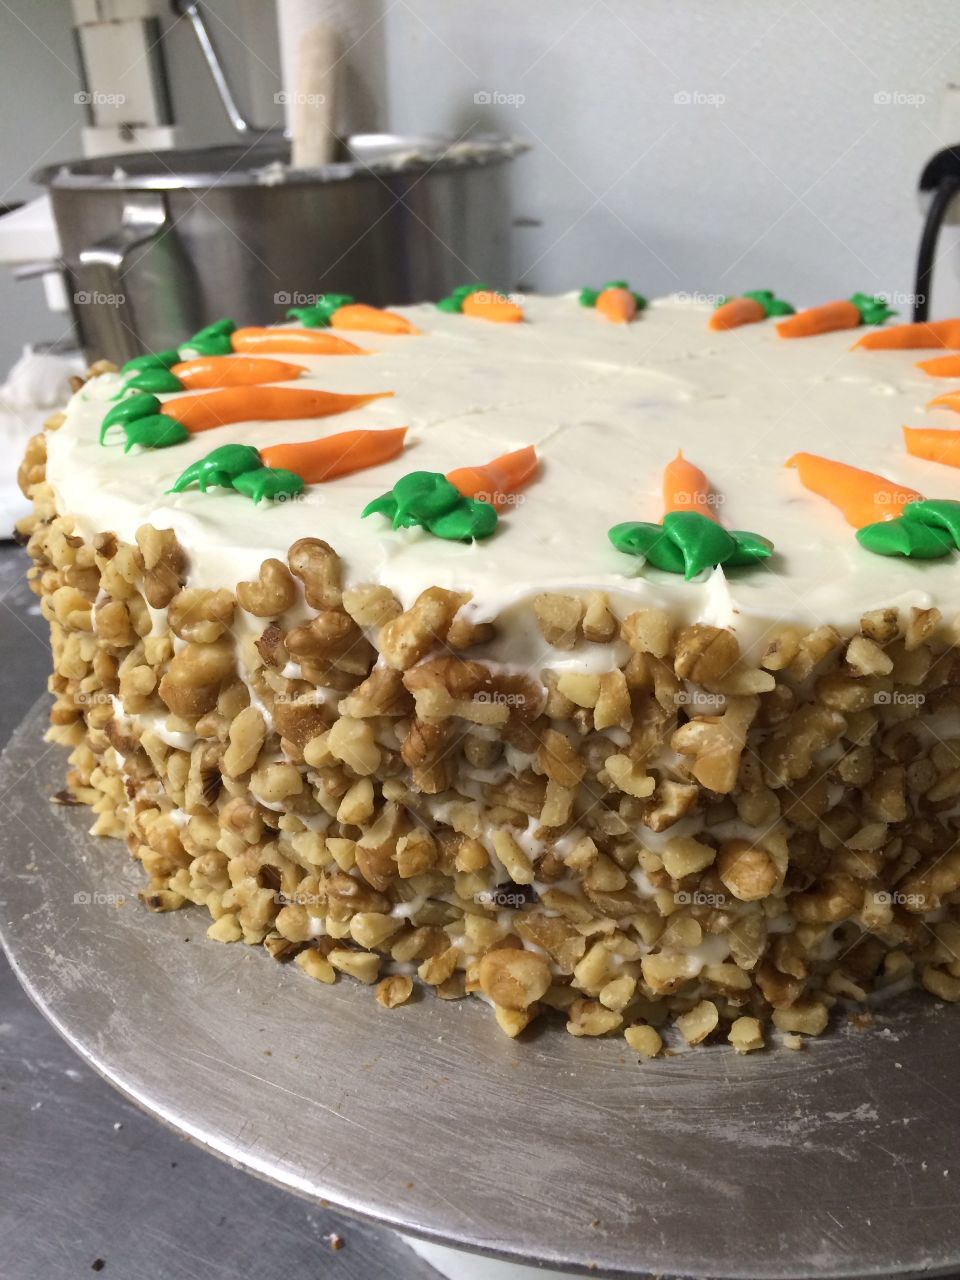 Carrot cake with cream cheese frosting, coated in crushed walnuts and decorated with frosting carrots